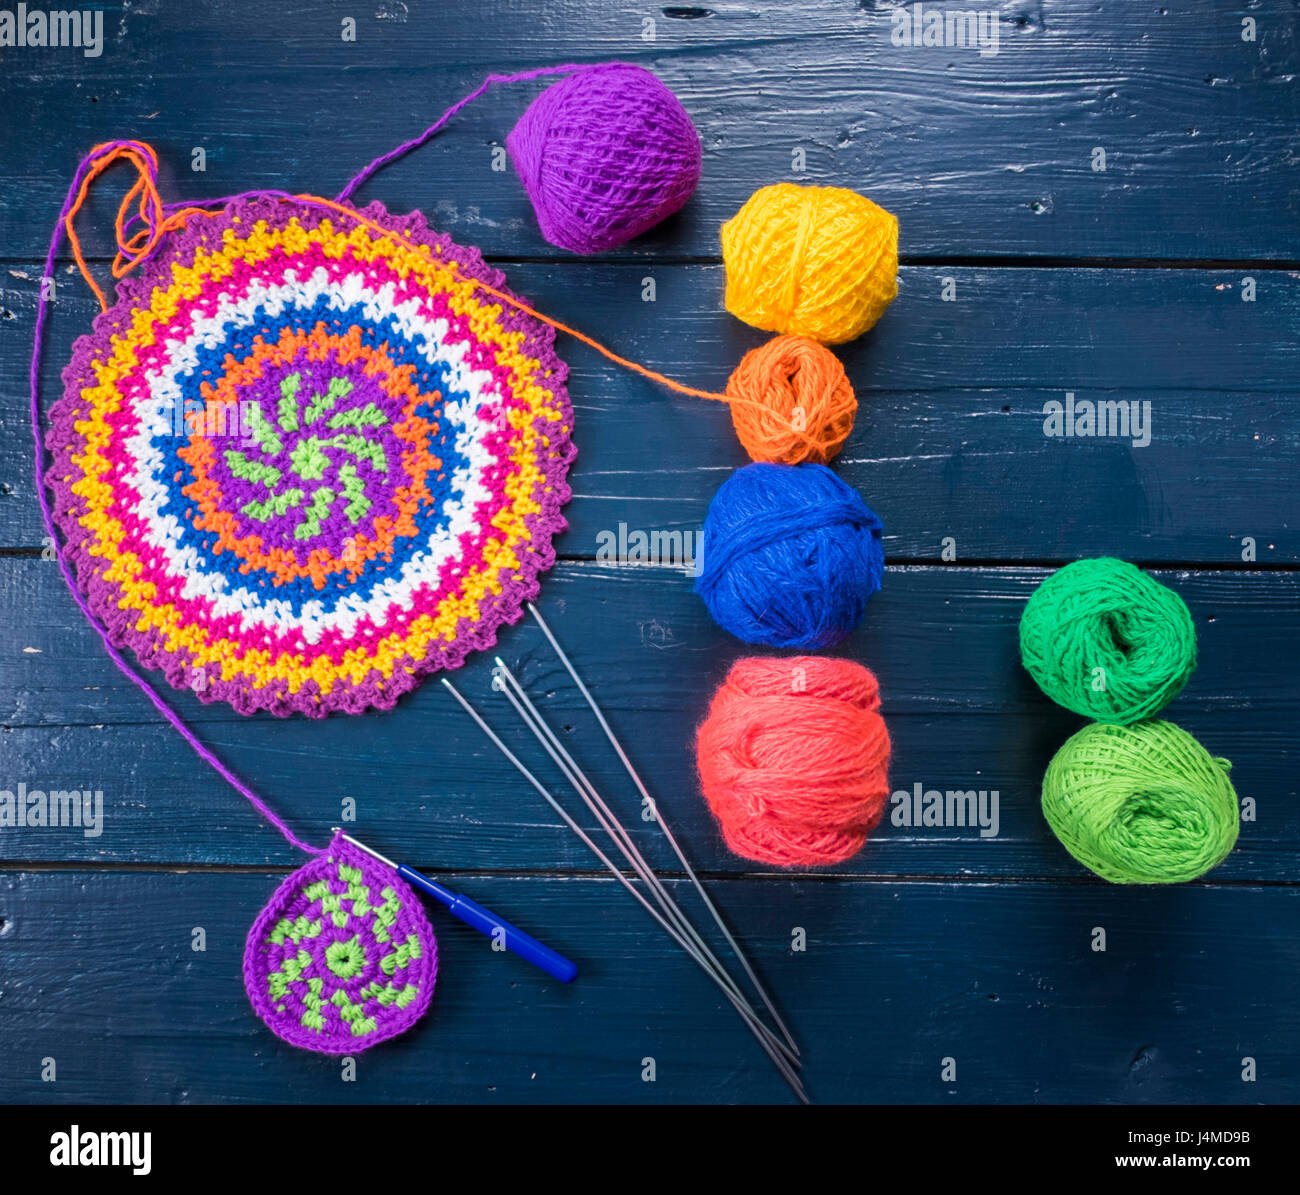 Knitting needles and multicolor yarn on blue table Stock Photo